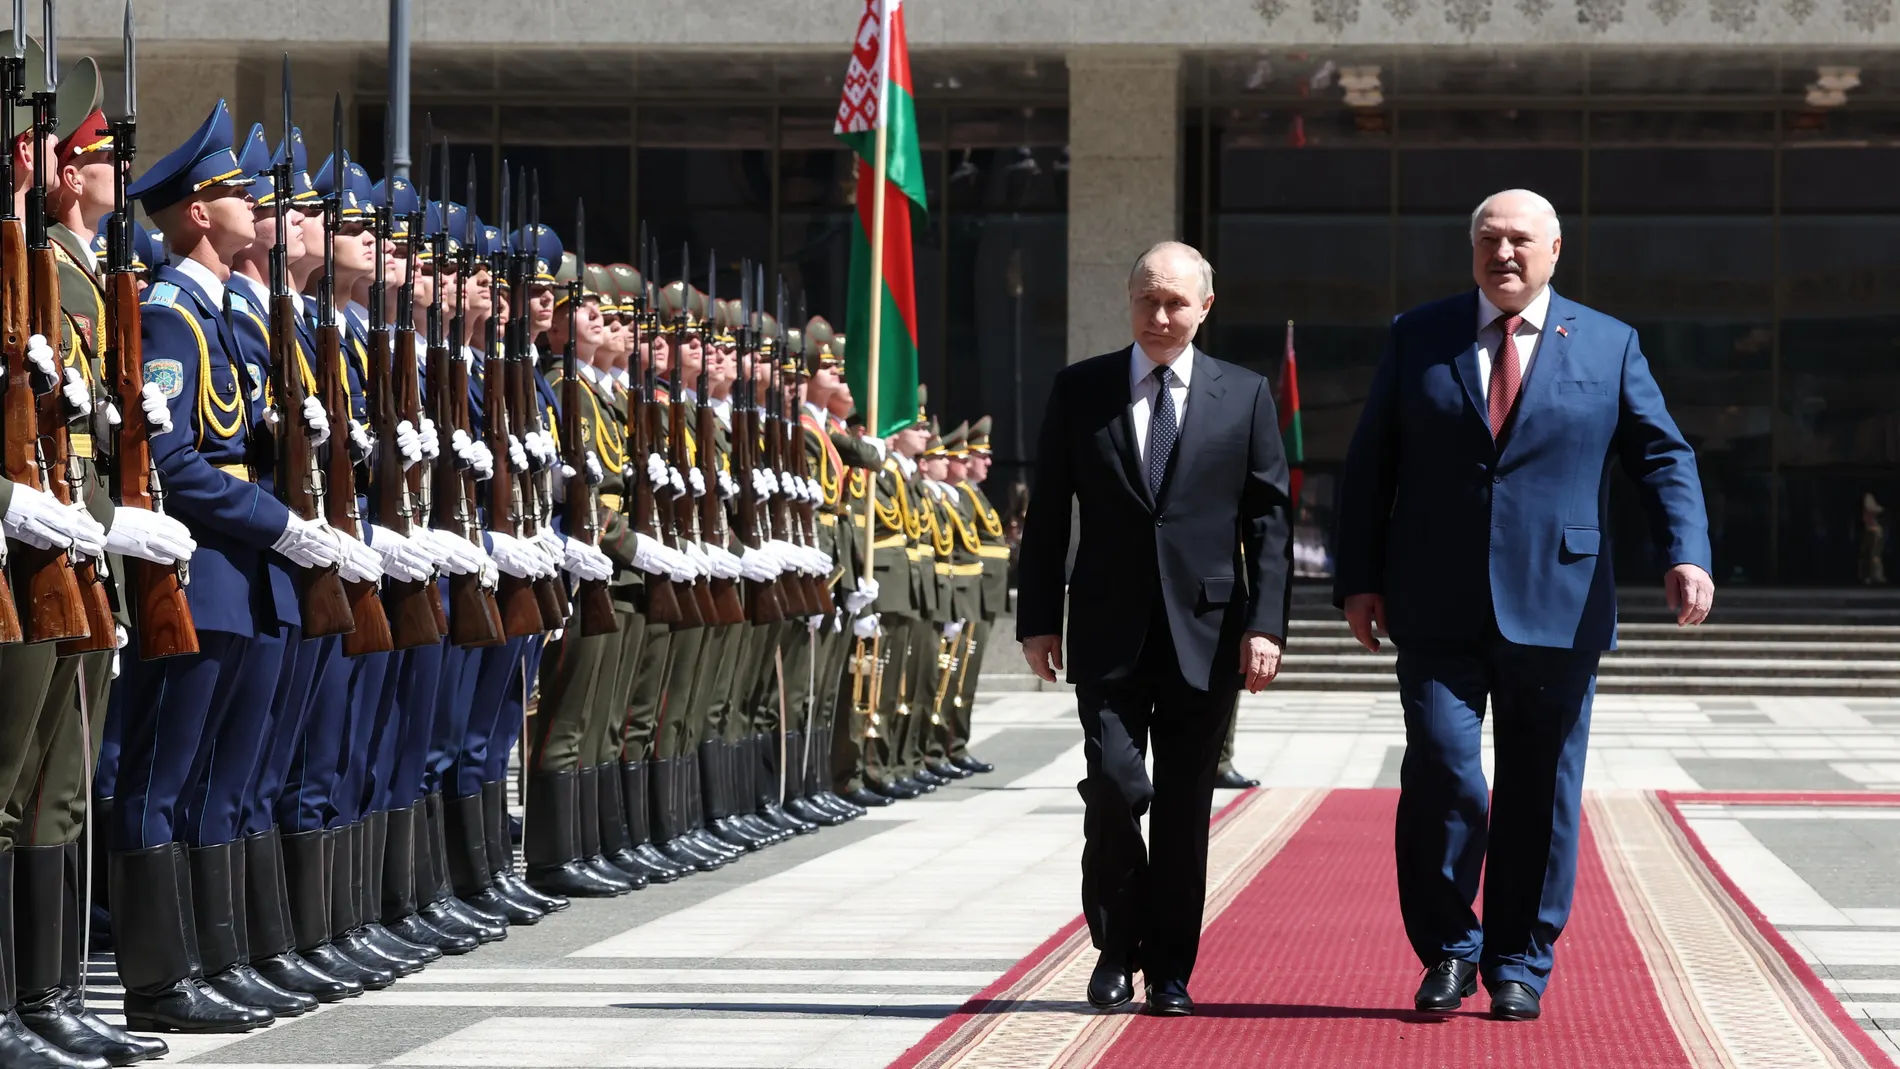 Minsk (Belarus), 23/05/2024.- Russian President Vladimir Putin (C) and Belarusian President Alexander Lukashenko attend a welcome ceremony at the Palace of Independence in Minsk, Belarus, 24 May 2024. Vladimir Putin said that during his visit to Minsk he plans to discuss security issues with his Belarusian counterpart Alexander Lukashenko, as well as the participation of the Belarusian side in exercises with non-strategic nuclear weapons. (Bielorrusia, Rusia) EFE/EPA/VALERIY SHARIFULIN / SPUT...